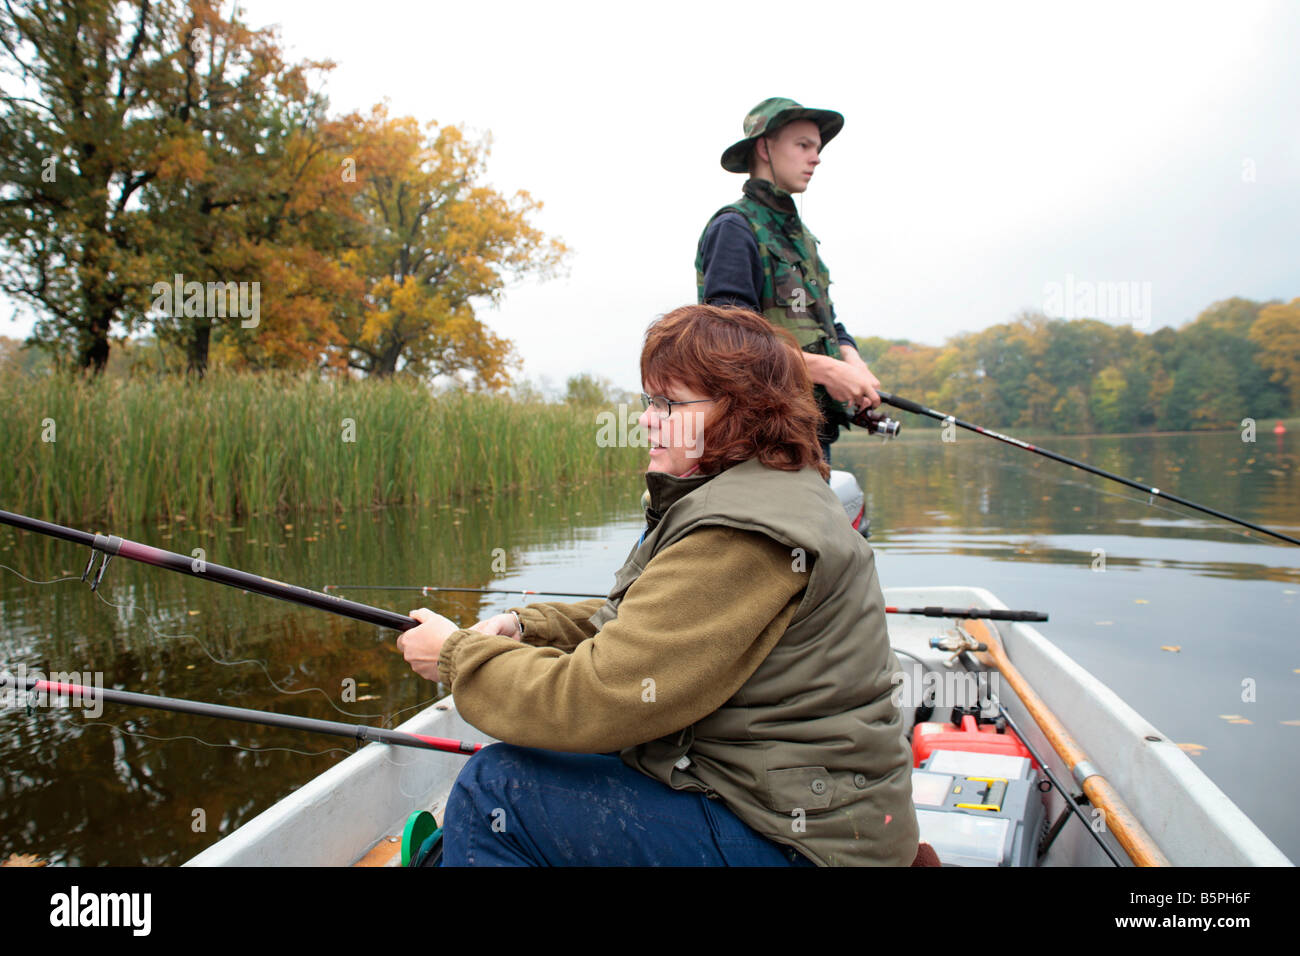 https://c8.alamy.com/comp/B5PH6F/a-teenage-boy-and-his-mother-fishing-from-a-boat-B5PH6F.jpg